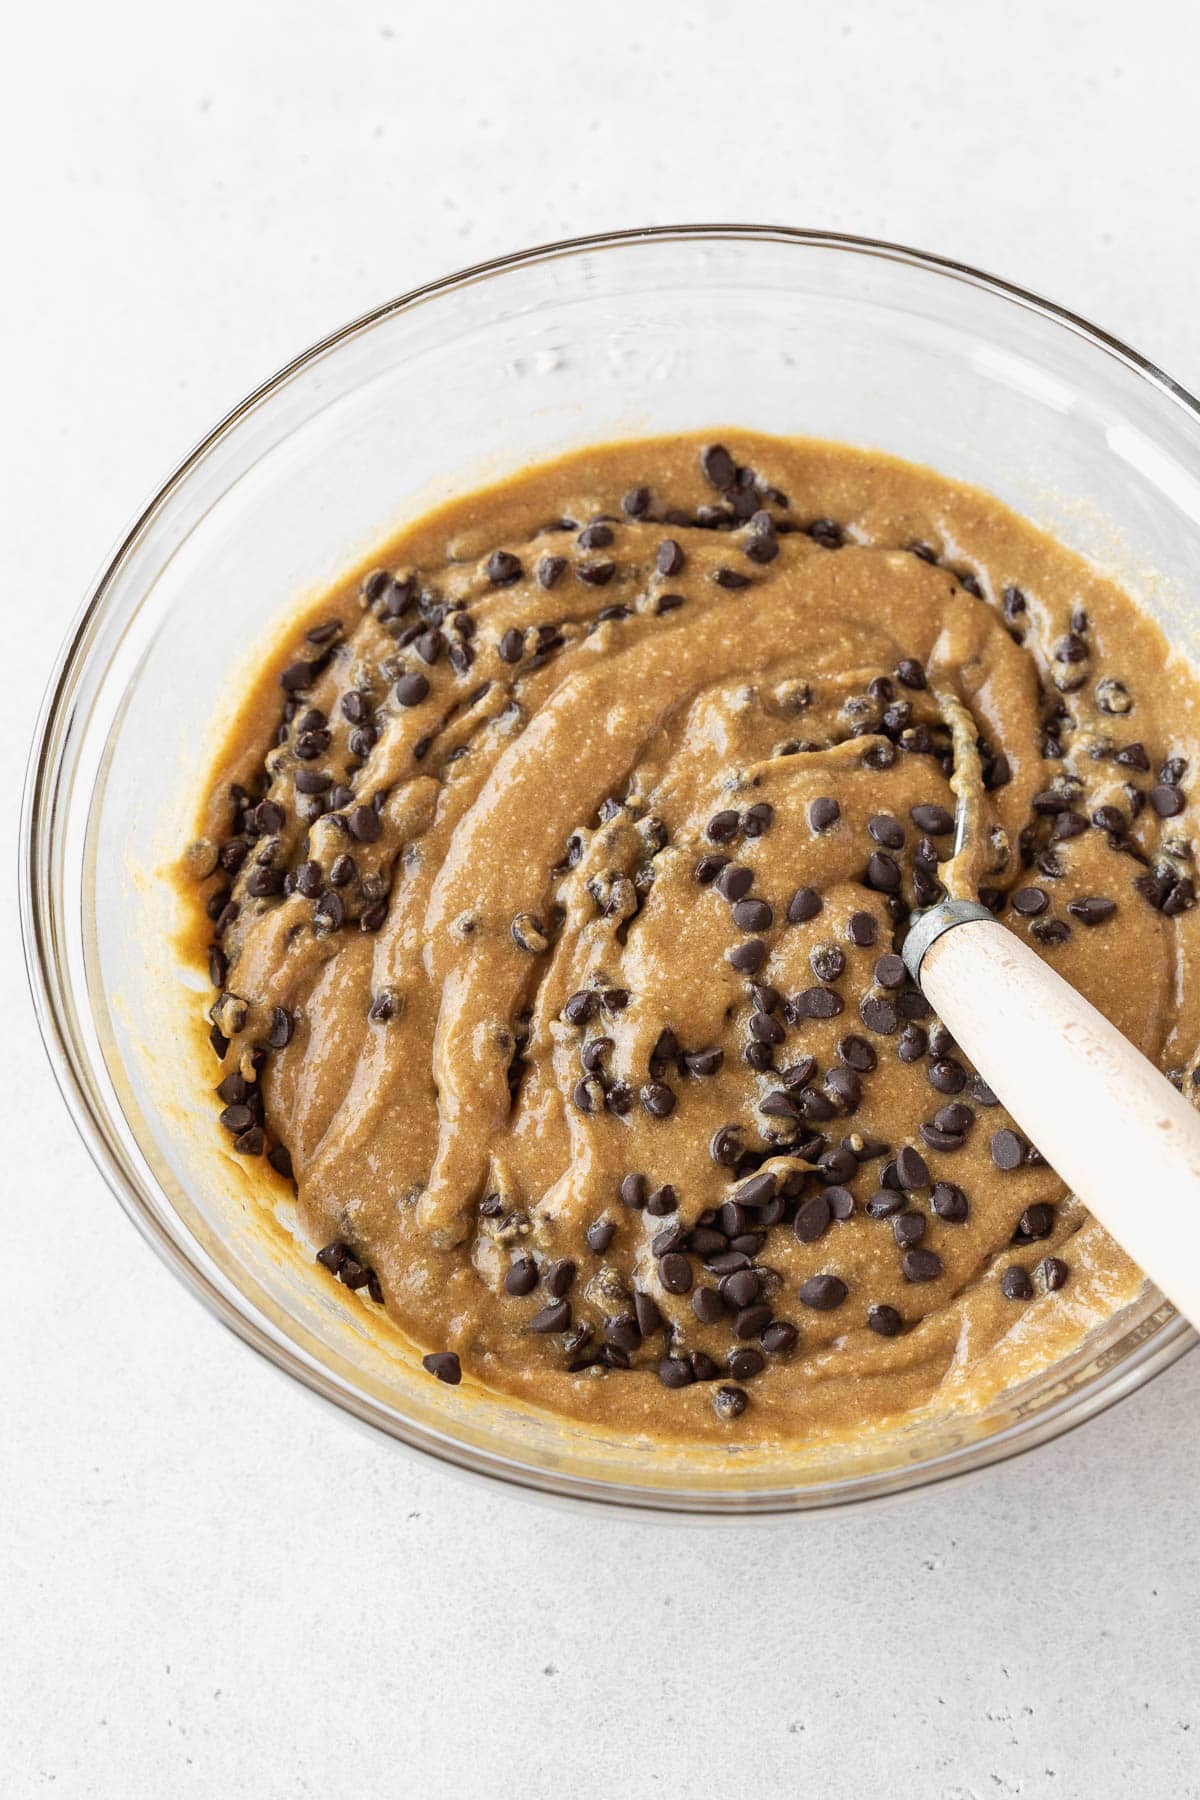 Step 3 for making dairy-free edible cookie dough — whisking in mini chocolate chips.